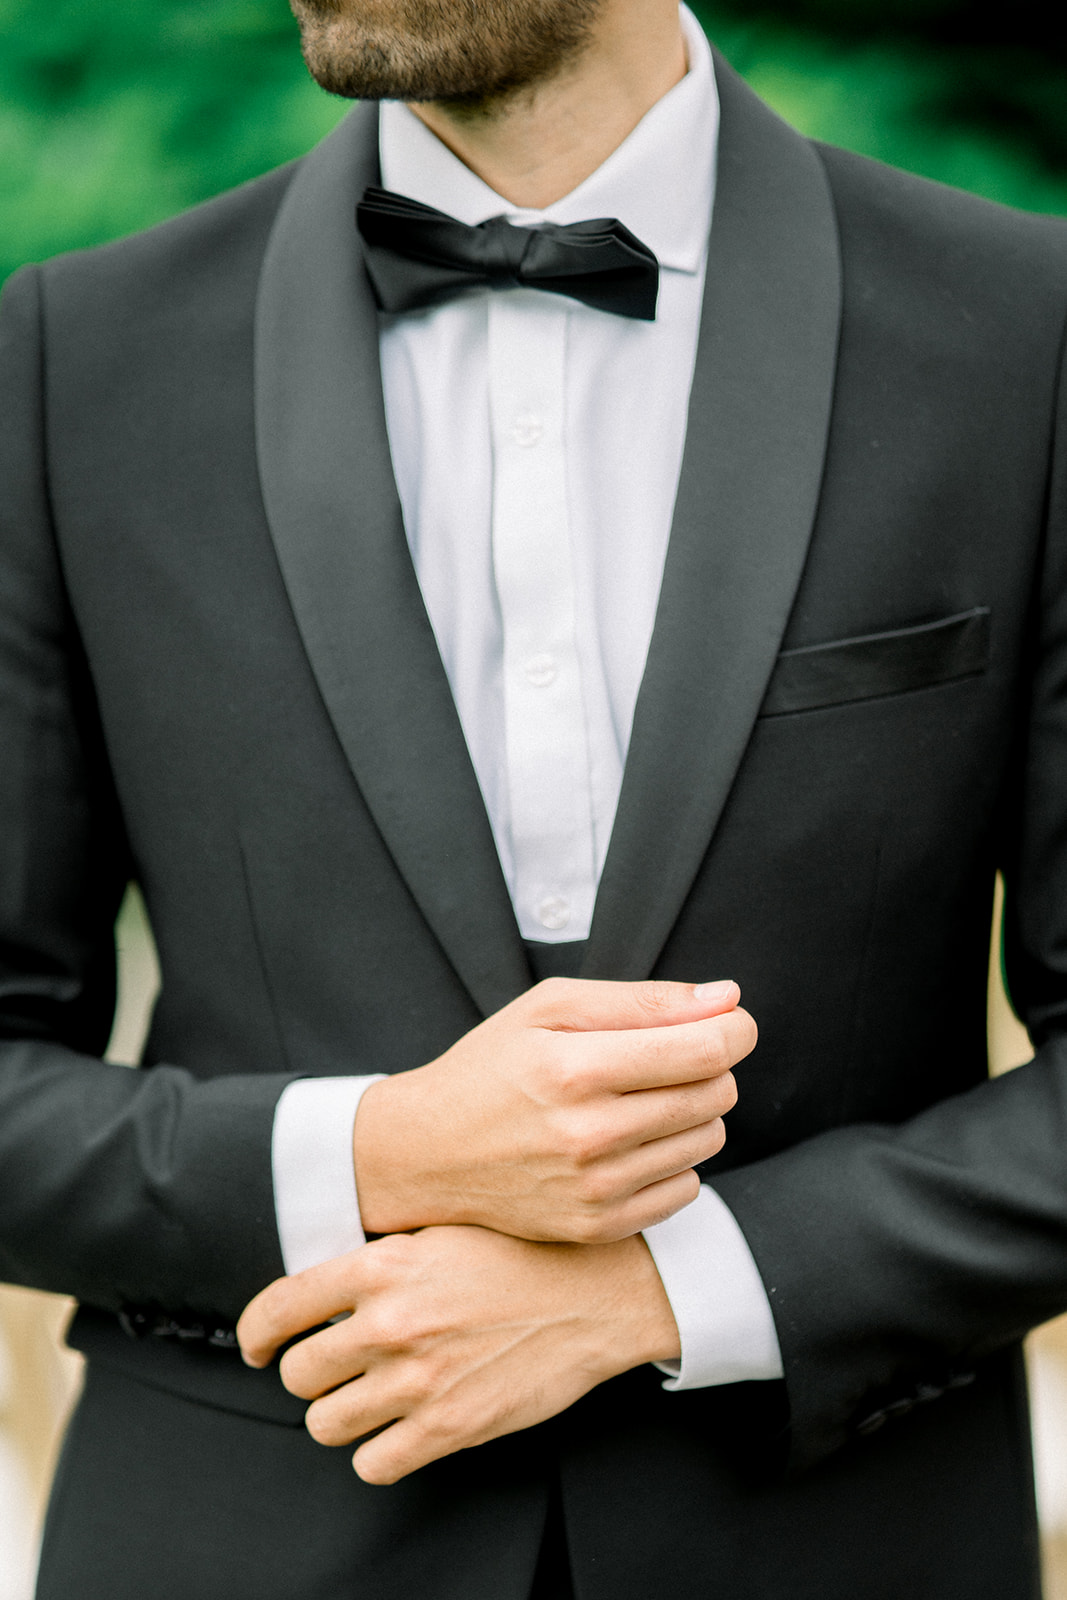 Classic and sophisticated groom's look, complete with a Paul Andrew tailored suit and a crisp white shirt.